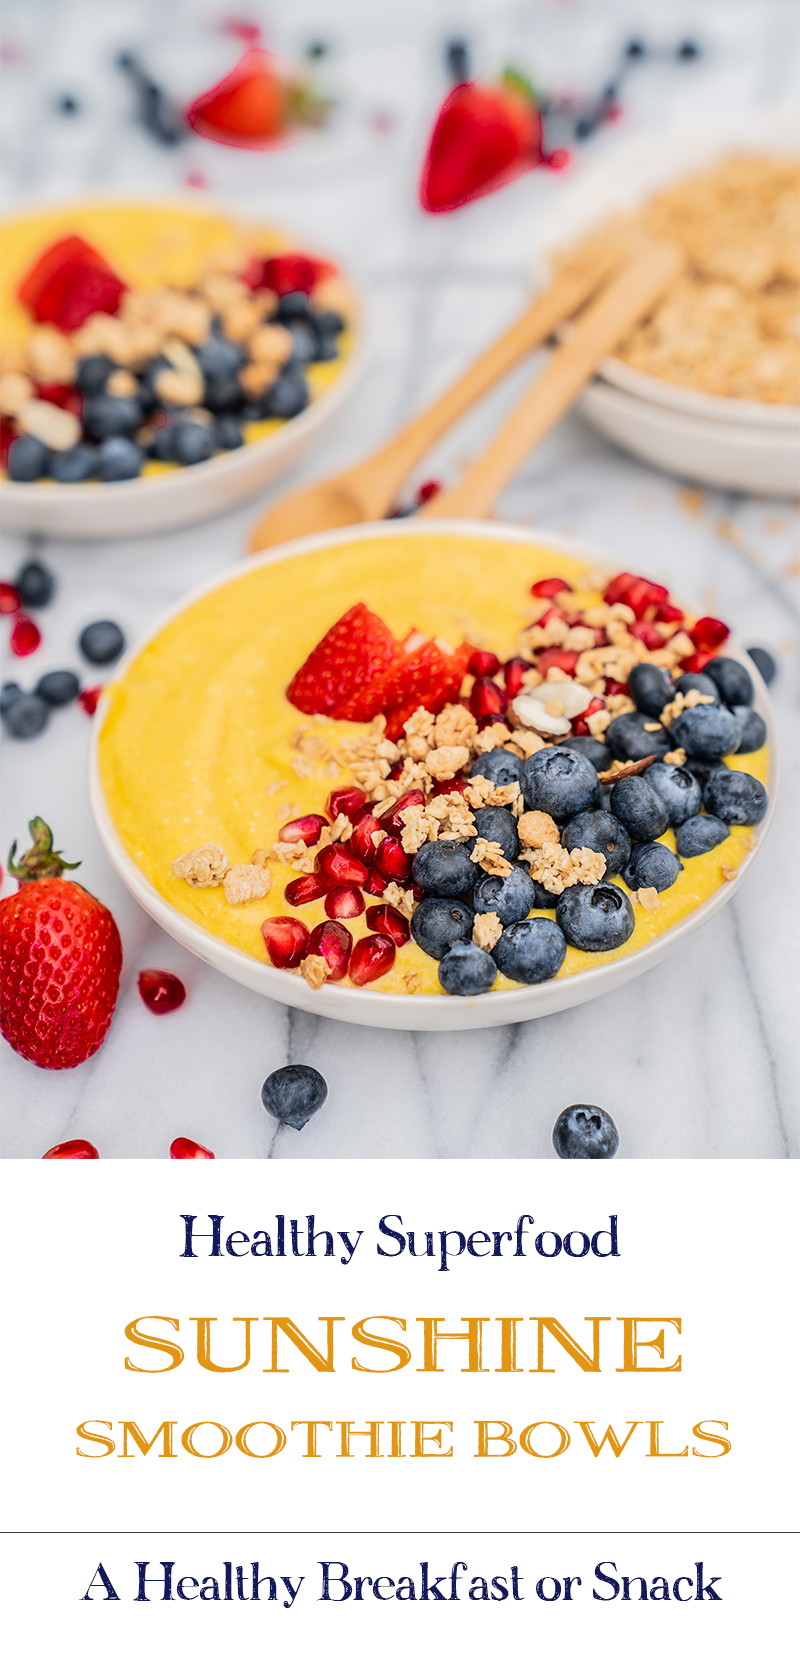 Healthy-Superfood-Sunshine-Smoothie-Bowls